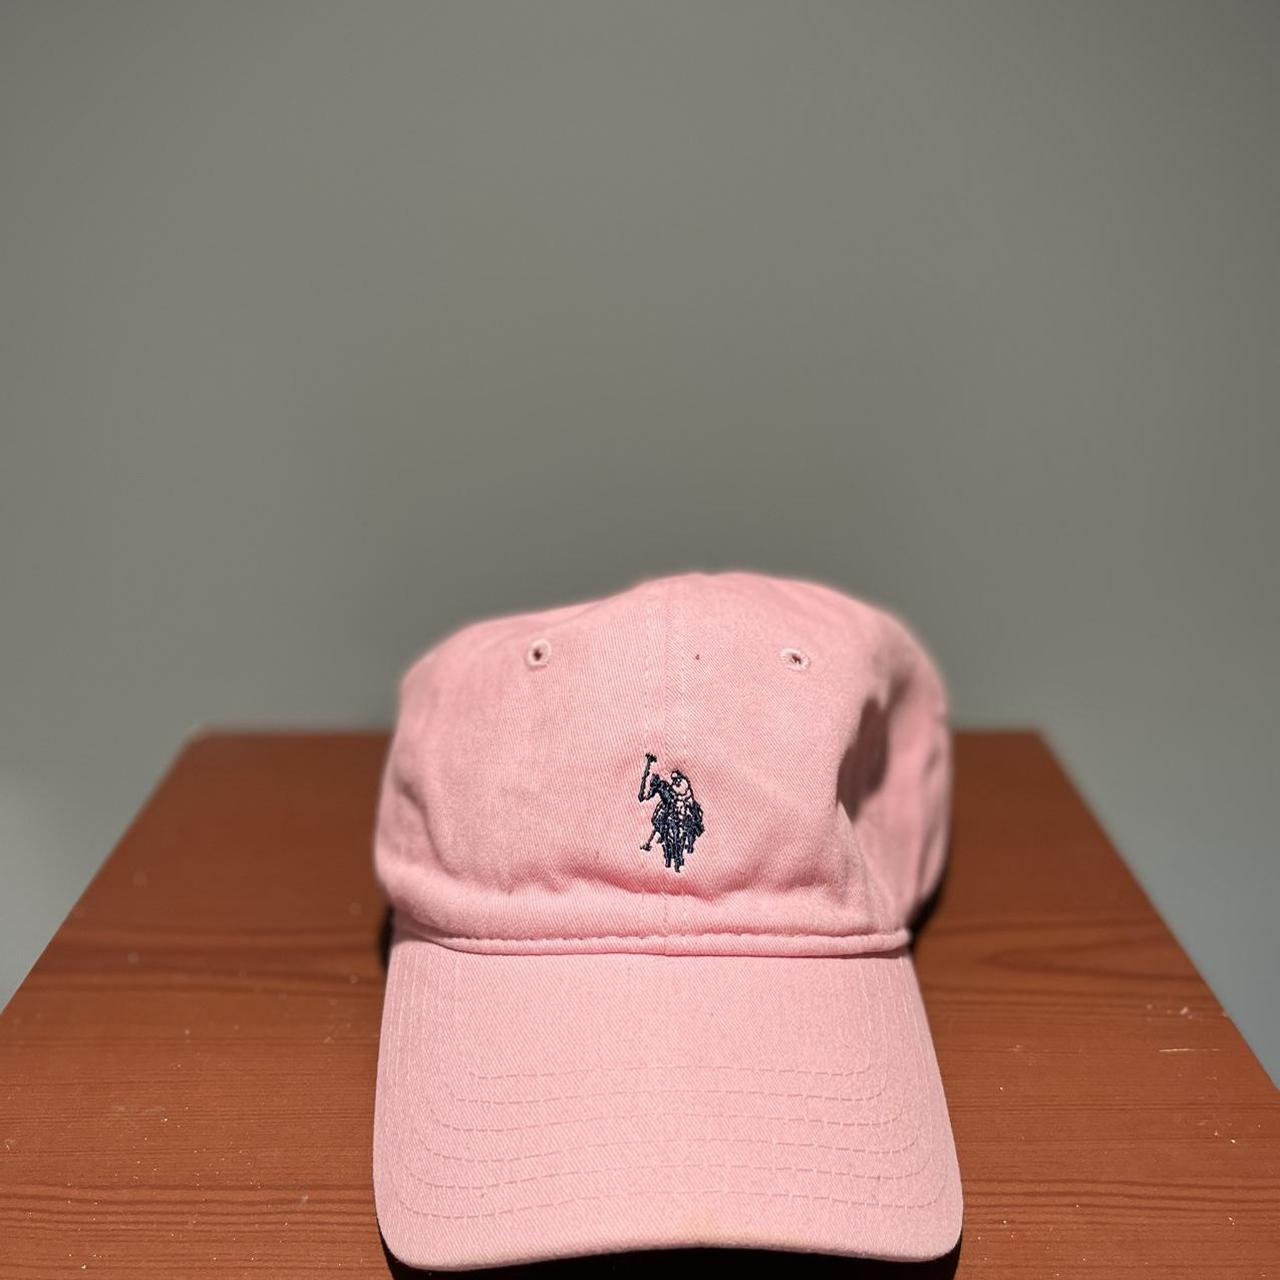 U.S. Polo Assn. Men's Pink and Navy Hat